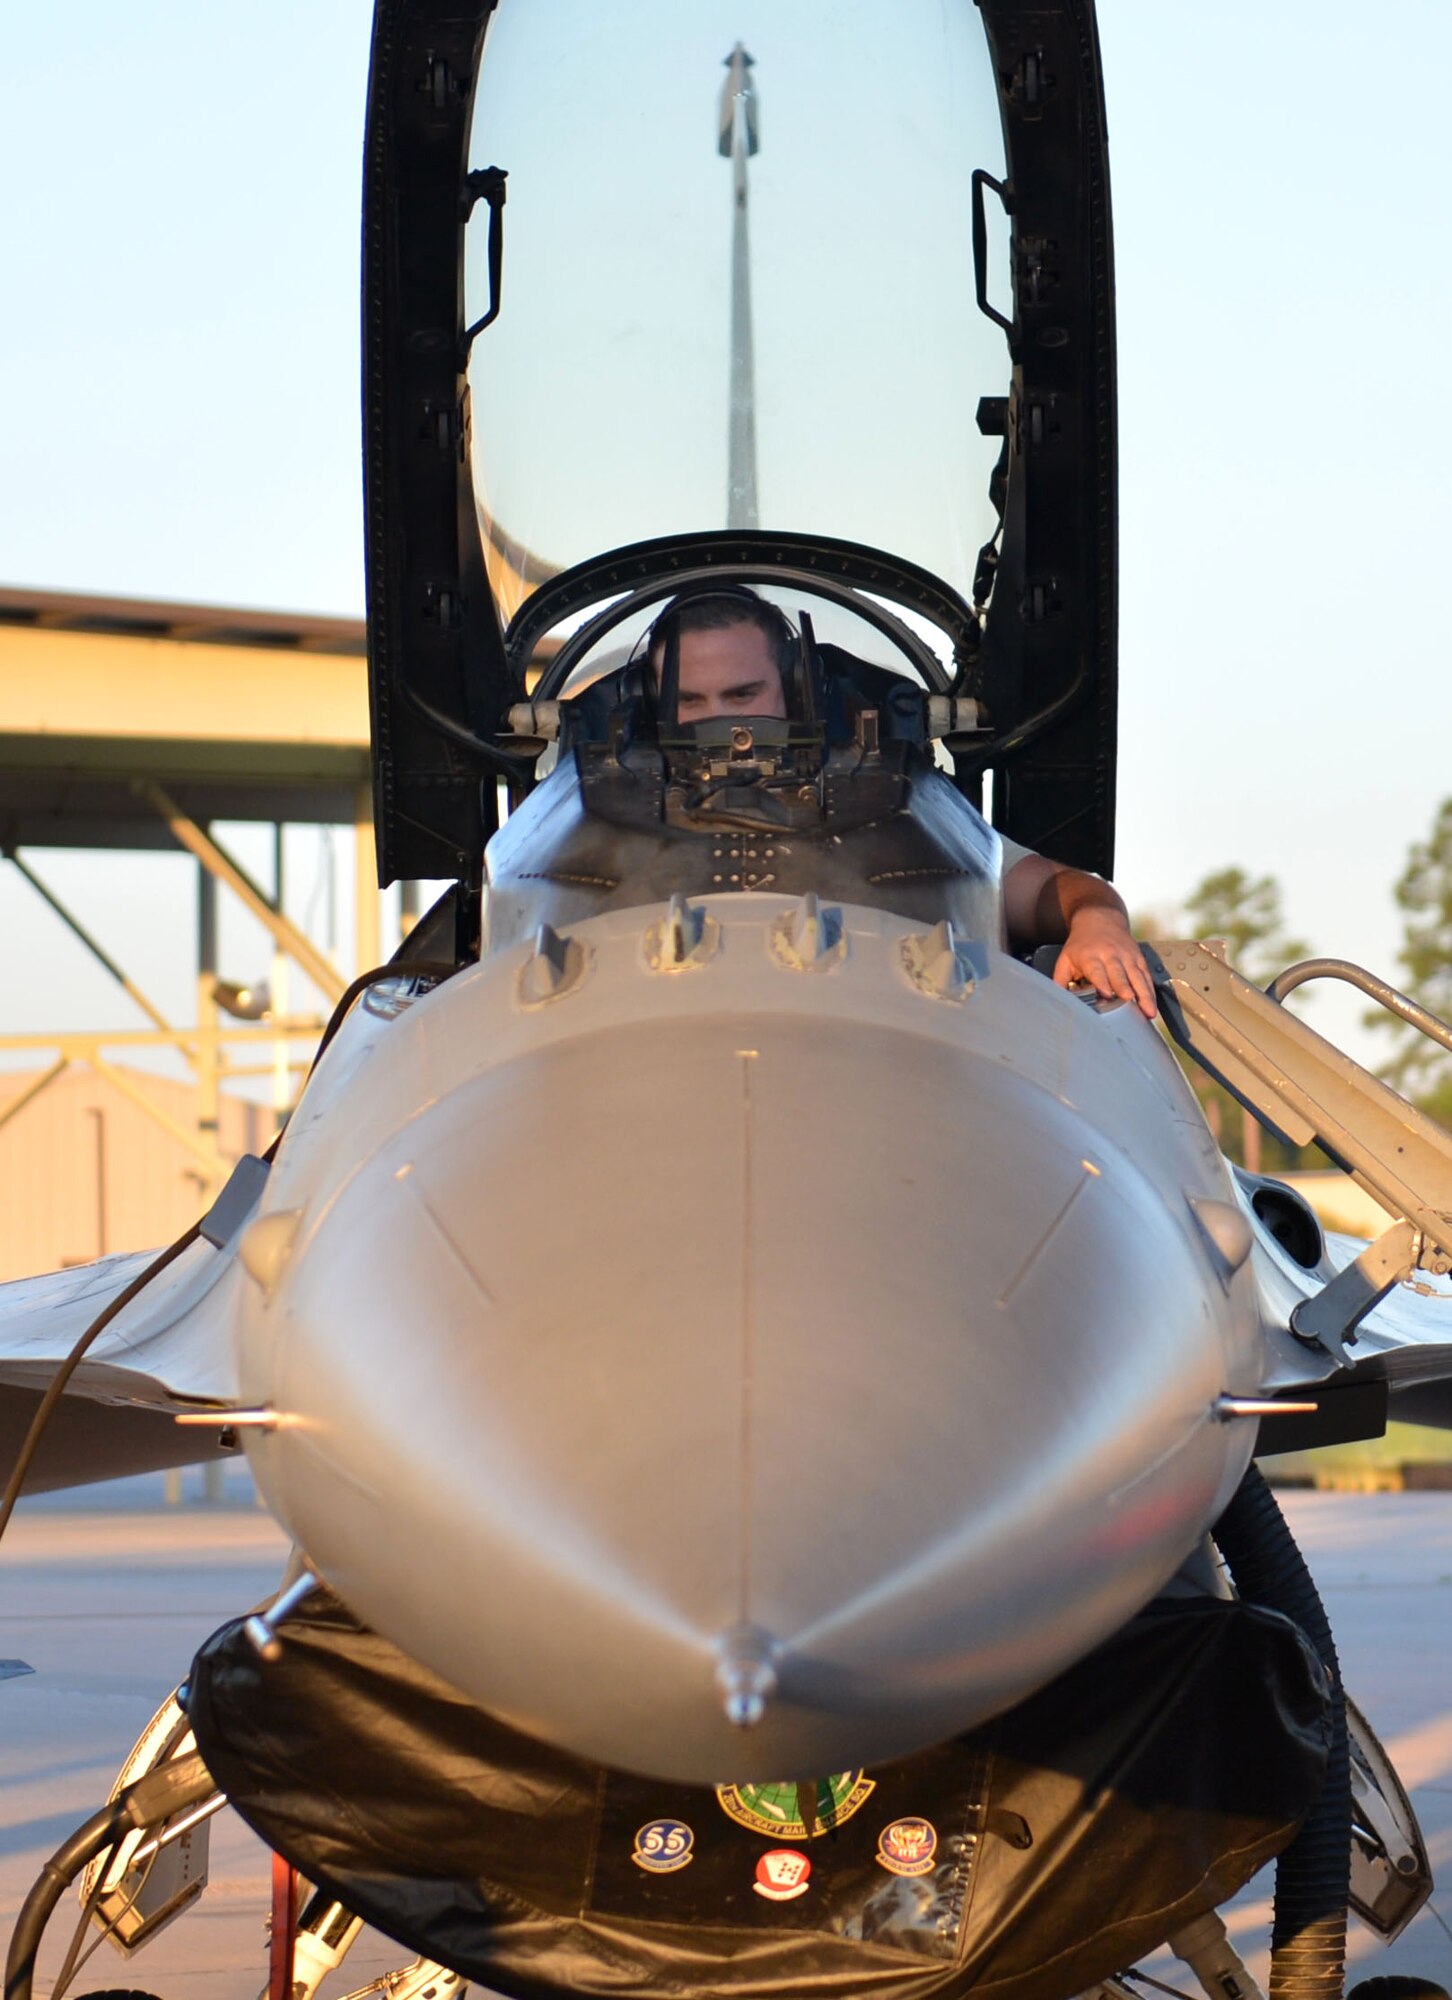 U.S. Air Force Staff Sgt. Devin Borger, 20th Aircraft Maintenance Squadron tactical aircraft maintainer, performs a pre-flight check on an F-16CM Fighting Falcon during operational readiness exercise Weasel Victory 17-07 at Shaw Air Force Base, S.C., May 15, 2017. Pre-flight checks are performed by maintainers and pilots to ensure aircraft meet all safety specifications and are ready for flight. (U.S. Air Force photo by Airman 1st Christopher Maldonado)